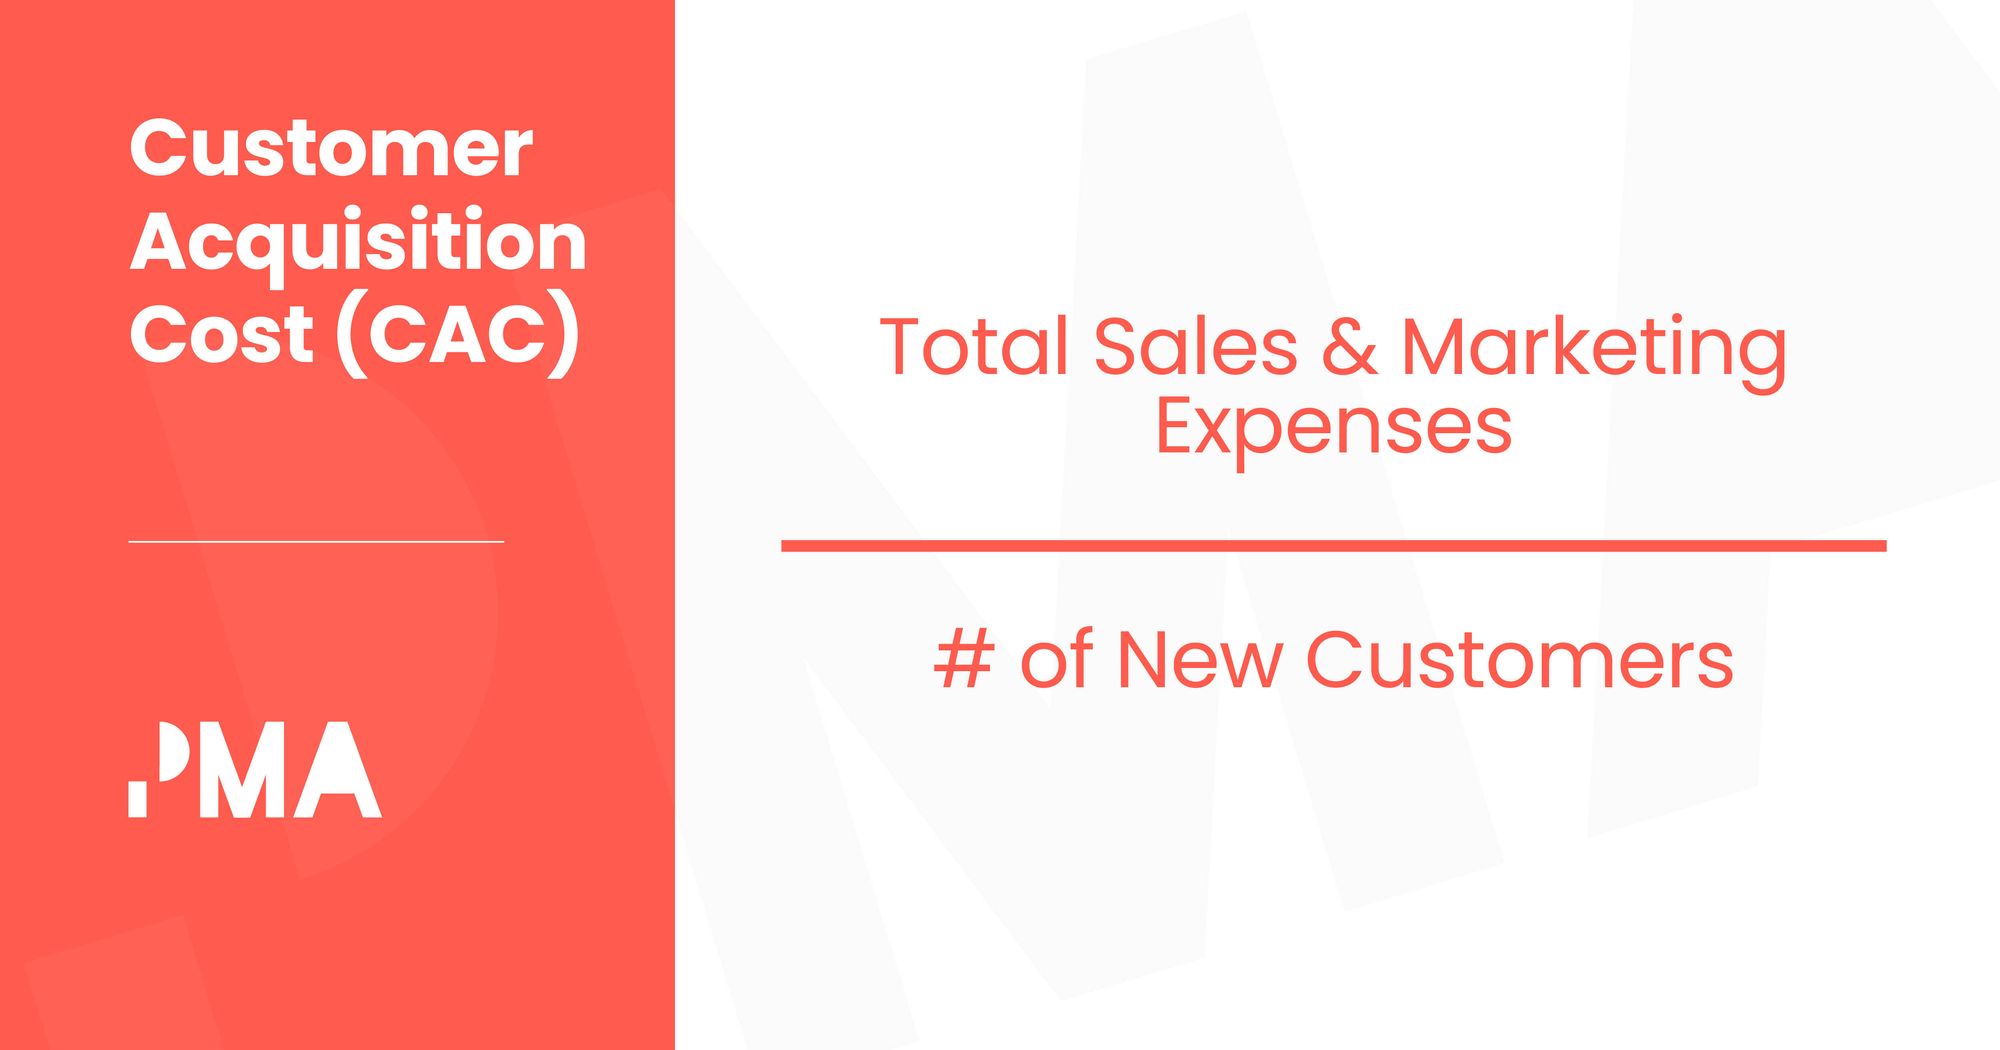 Customer acquisition cost (CAC) is a vital sales pipeline metric to follow as it indicates how much money your company has invested to get a customer through the door.